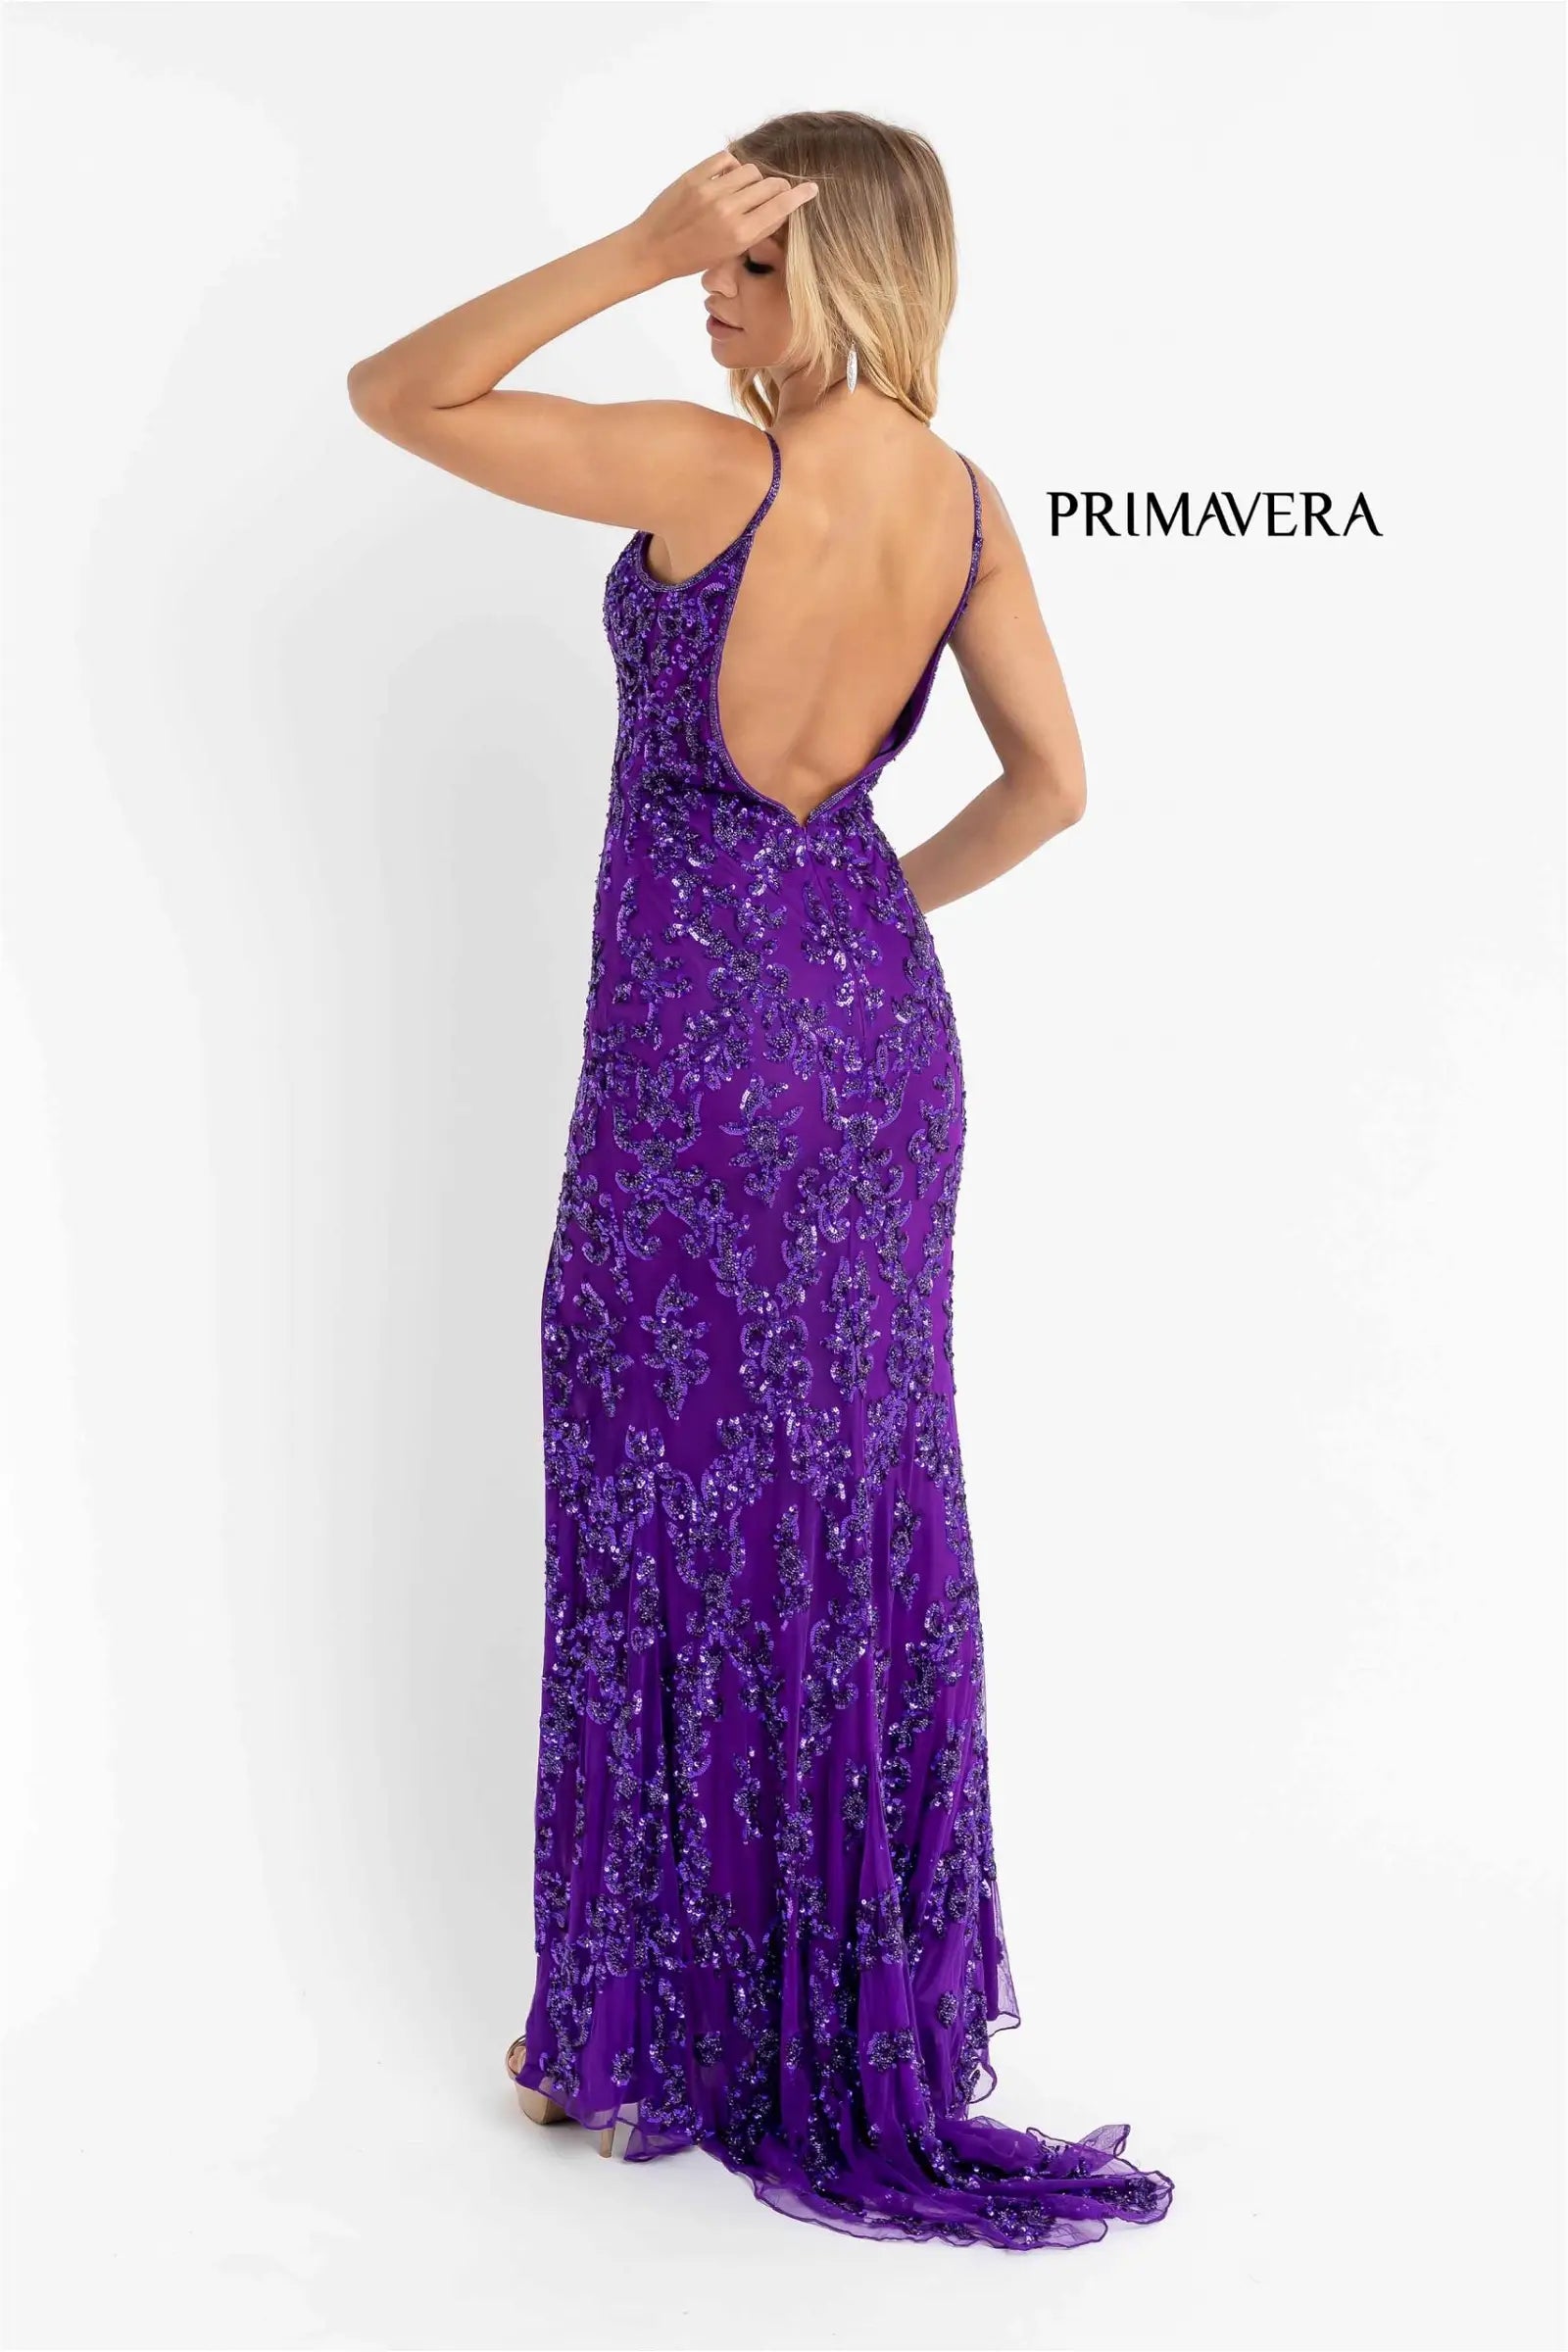 Primavera Couture 3913 Prom Dress Long Beaded Dress. Such a gorgeous gown with a beautiful design going down it.